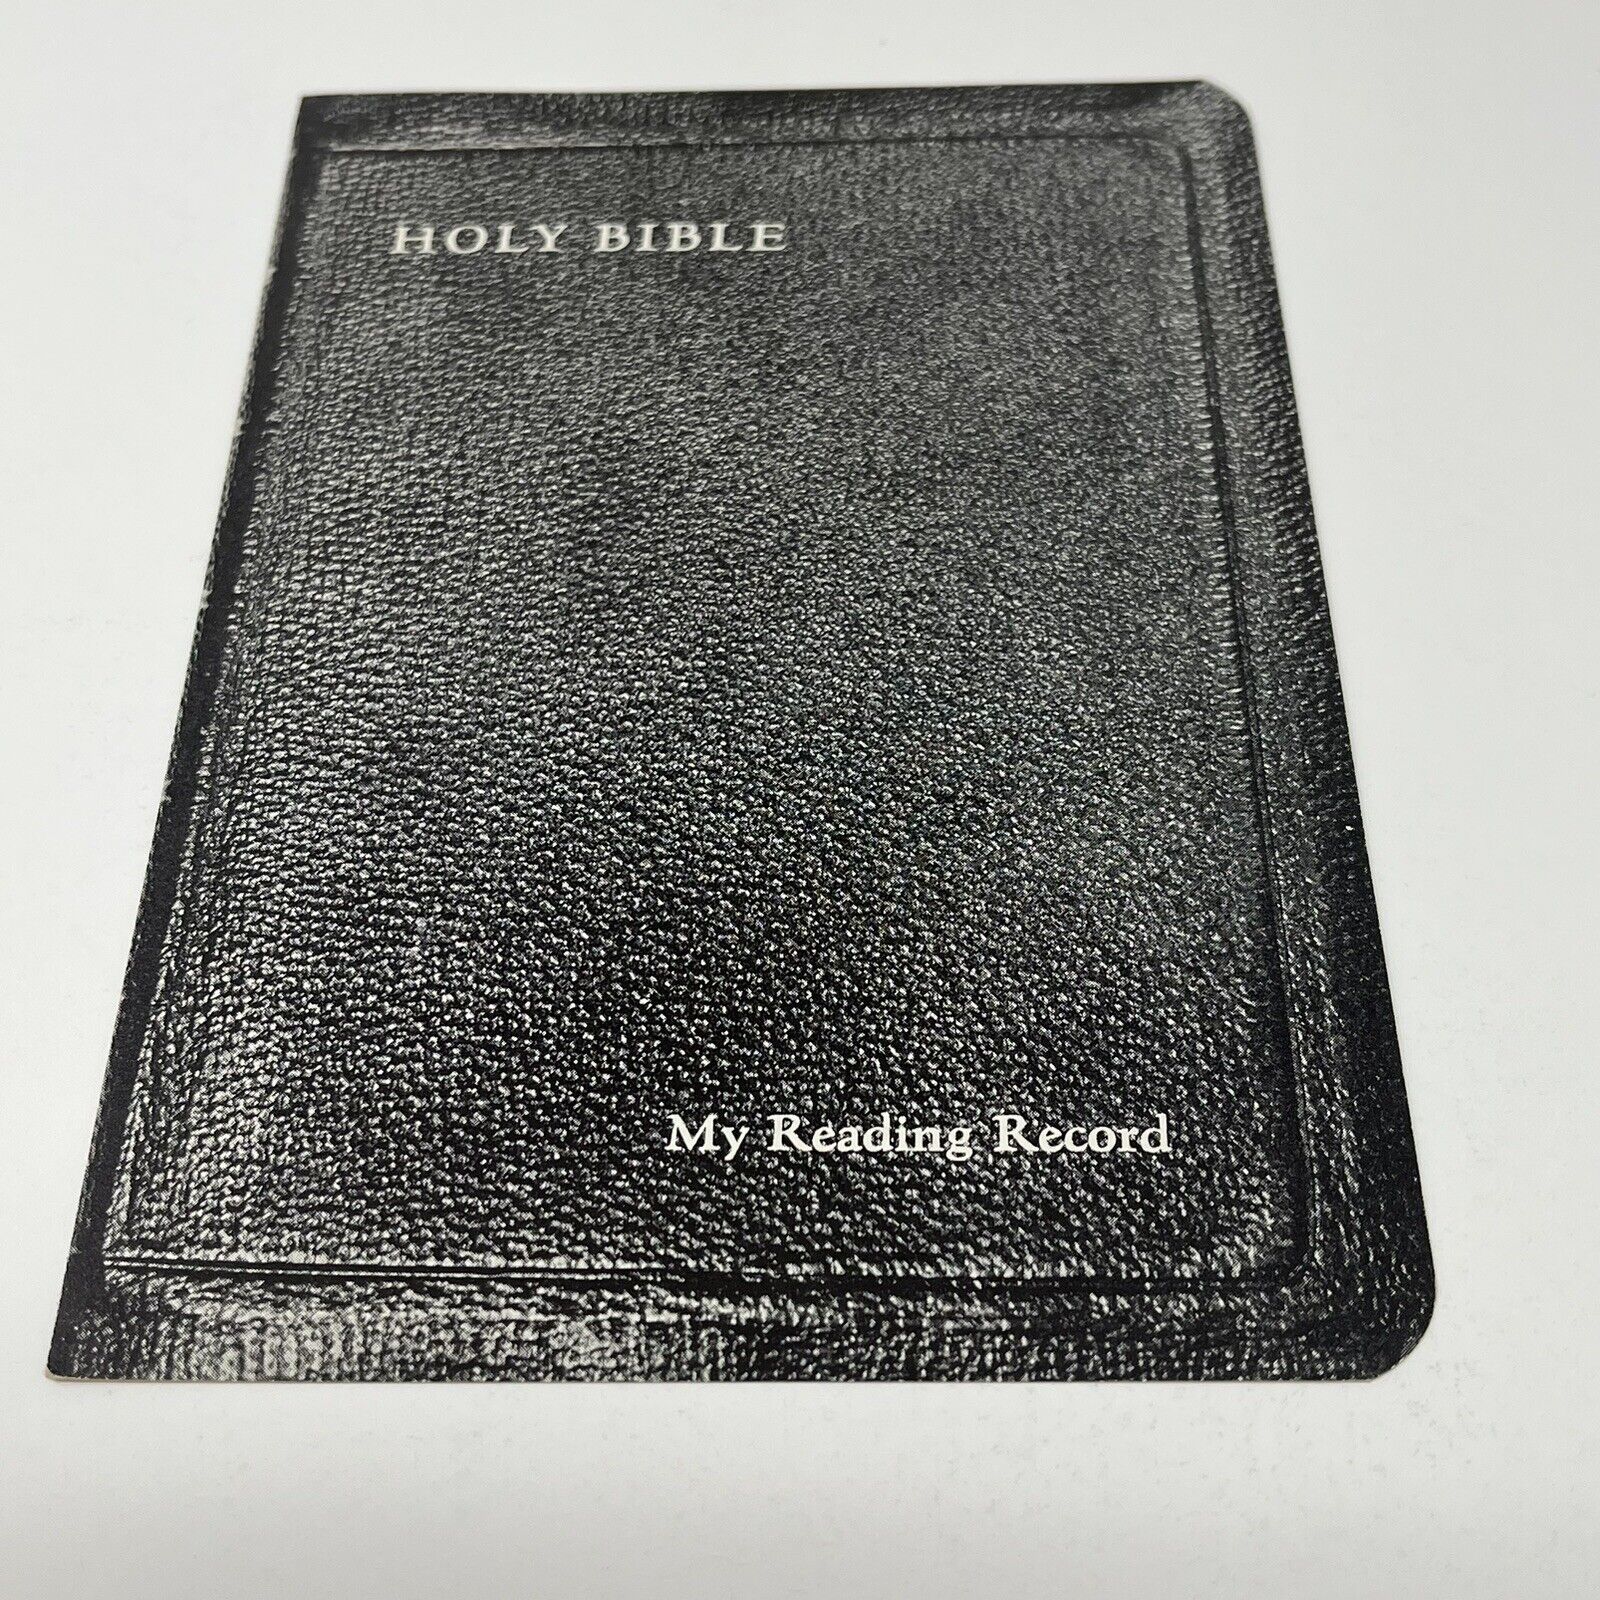 Vintage American Bible Society Holy Bible My Reading Record Unused